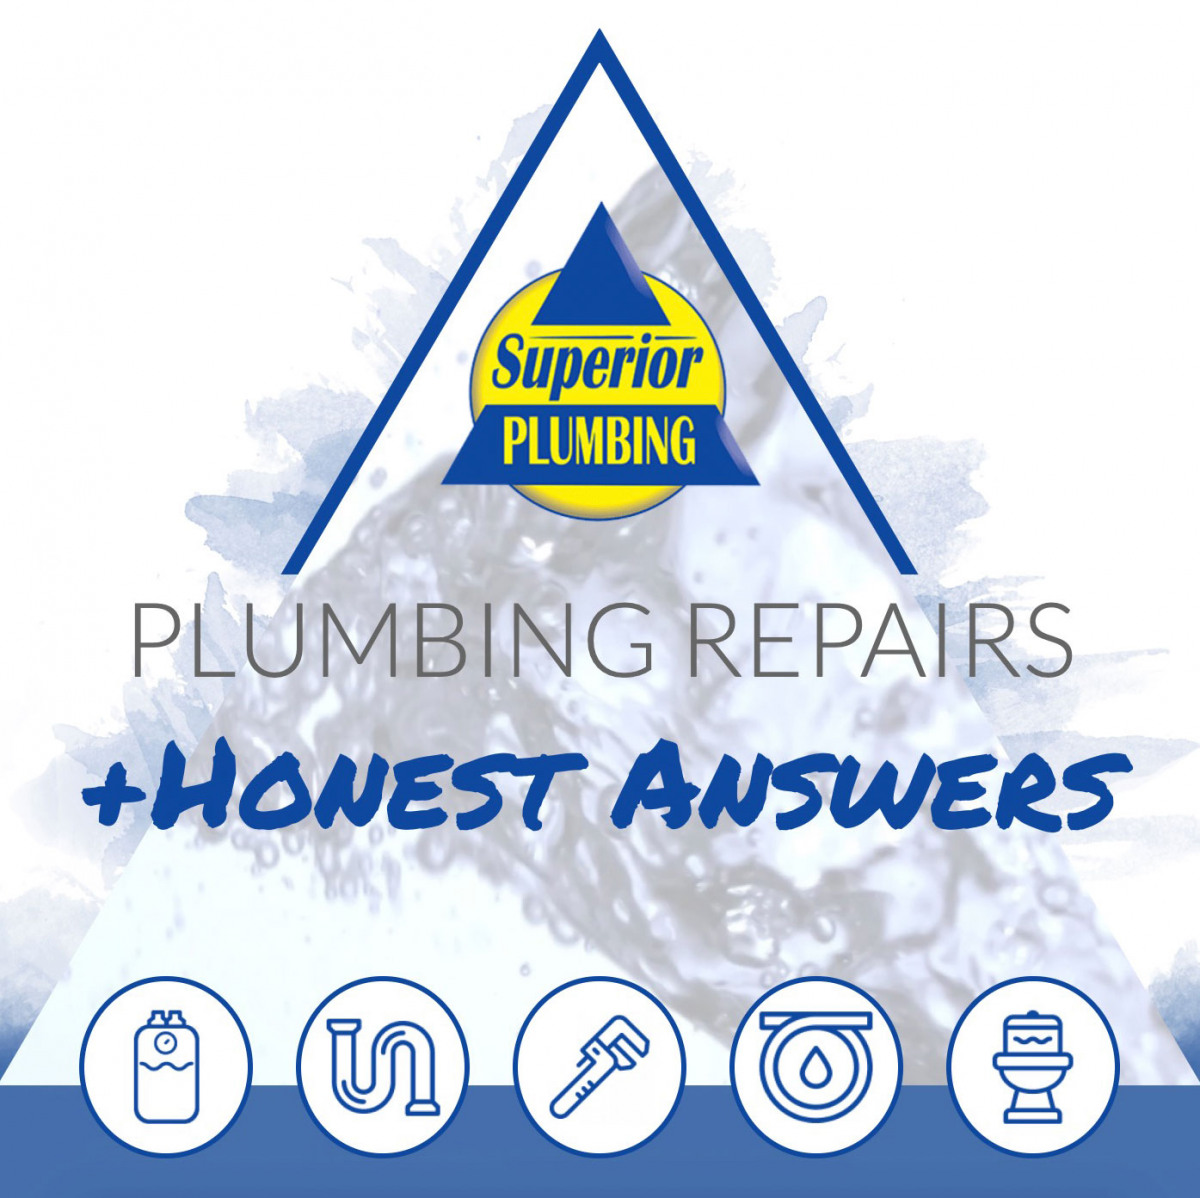 Image of website for Superior Plumbing